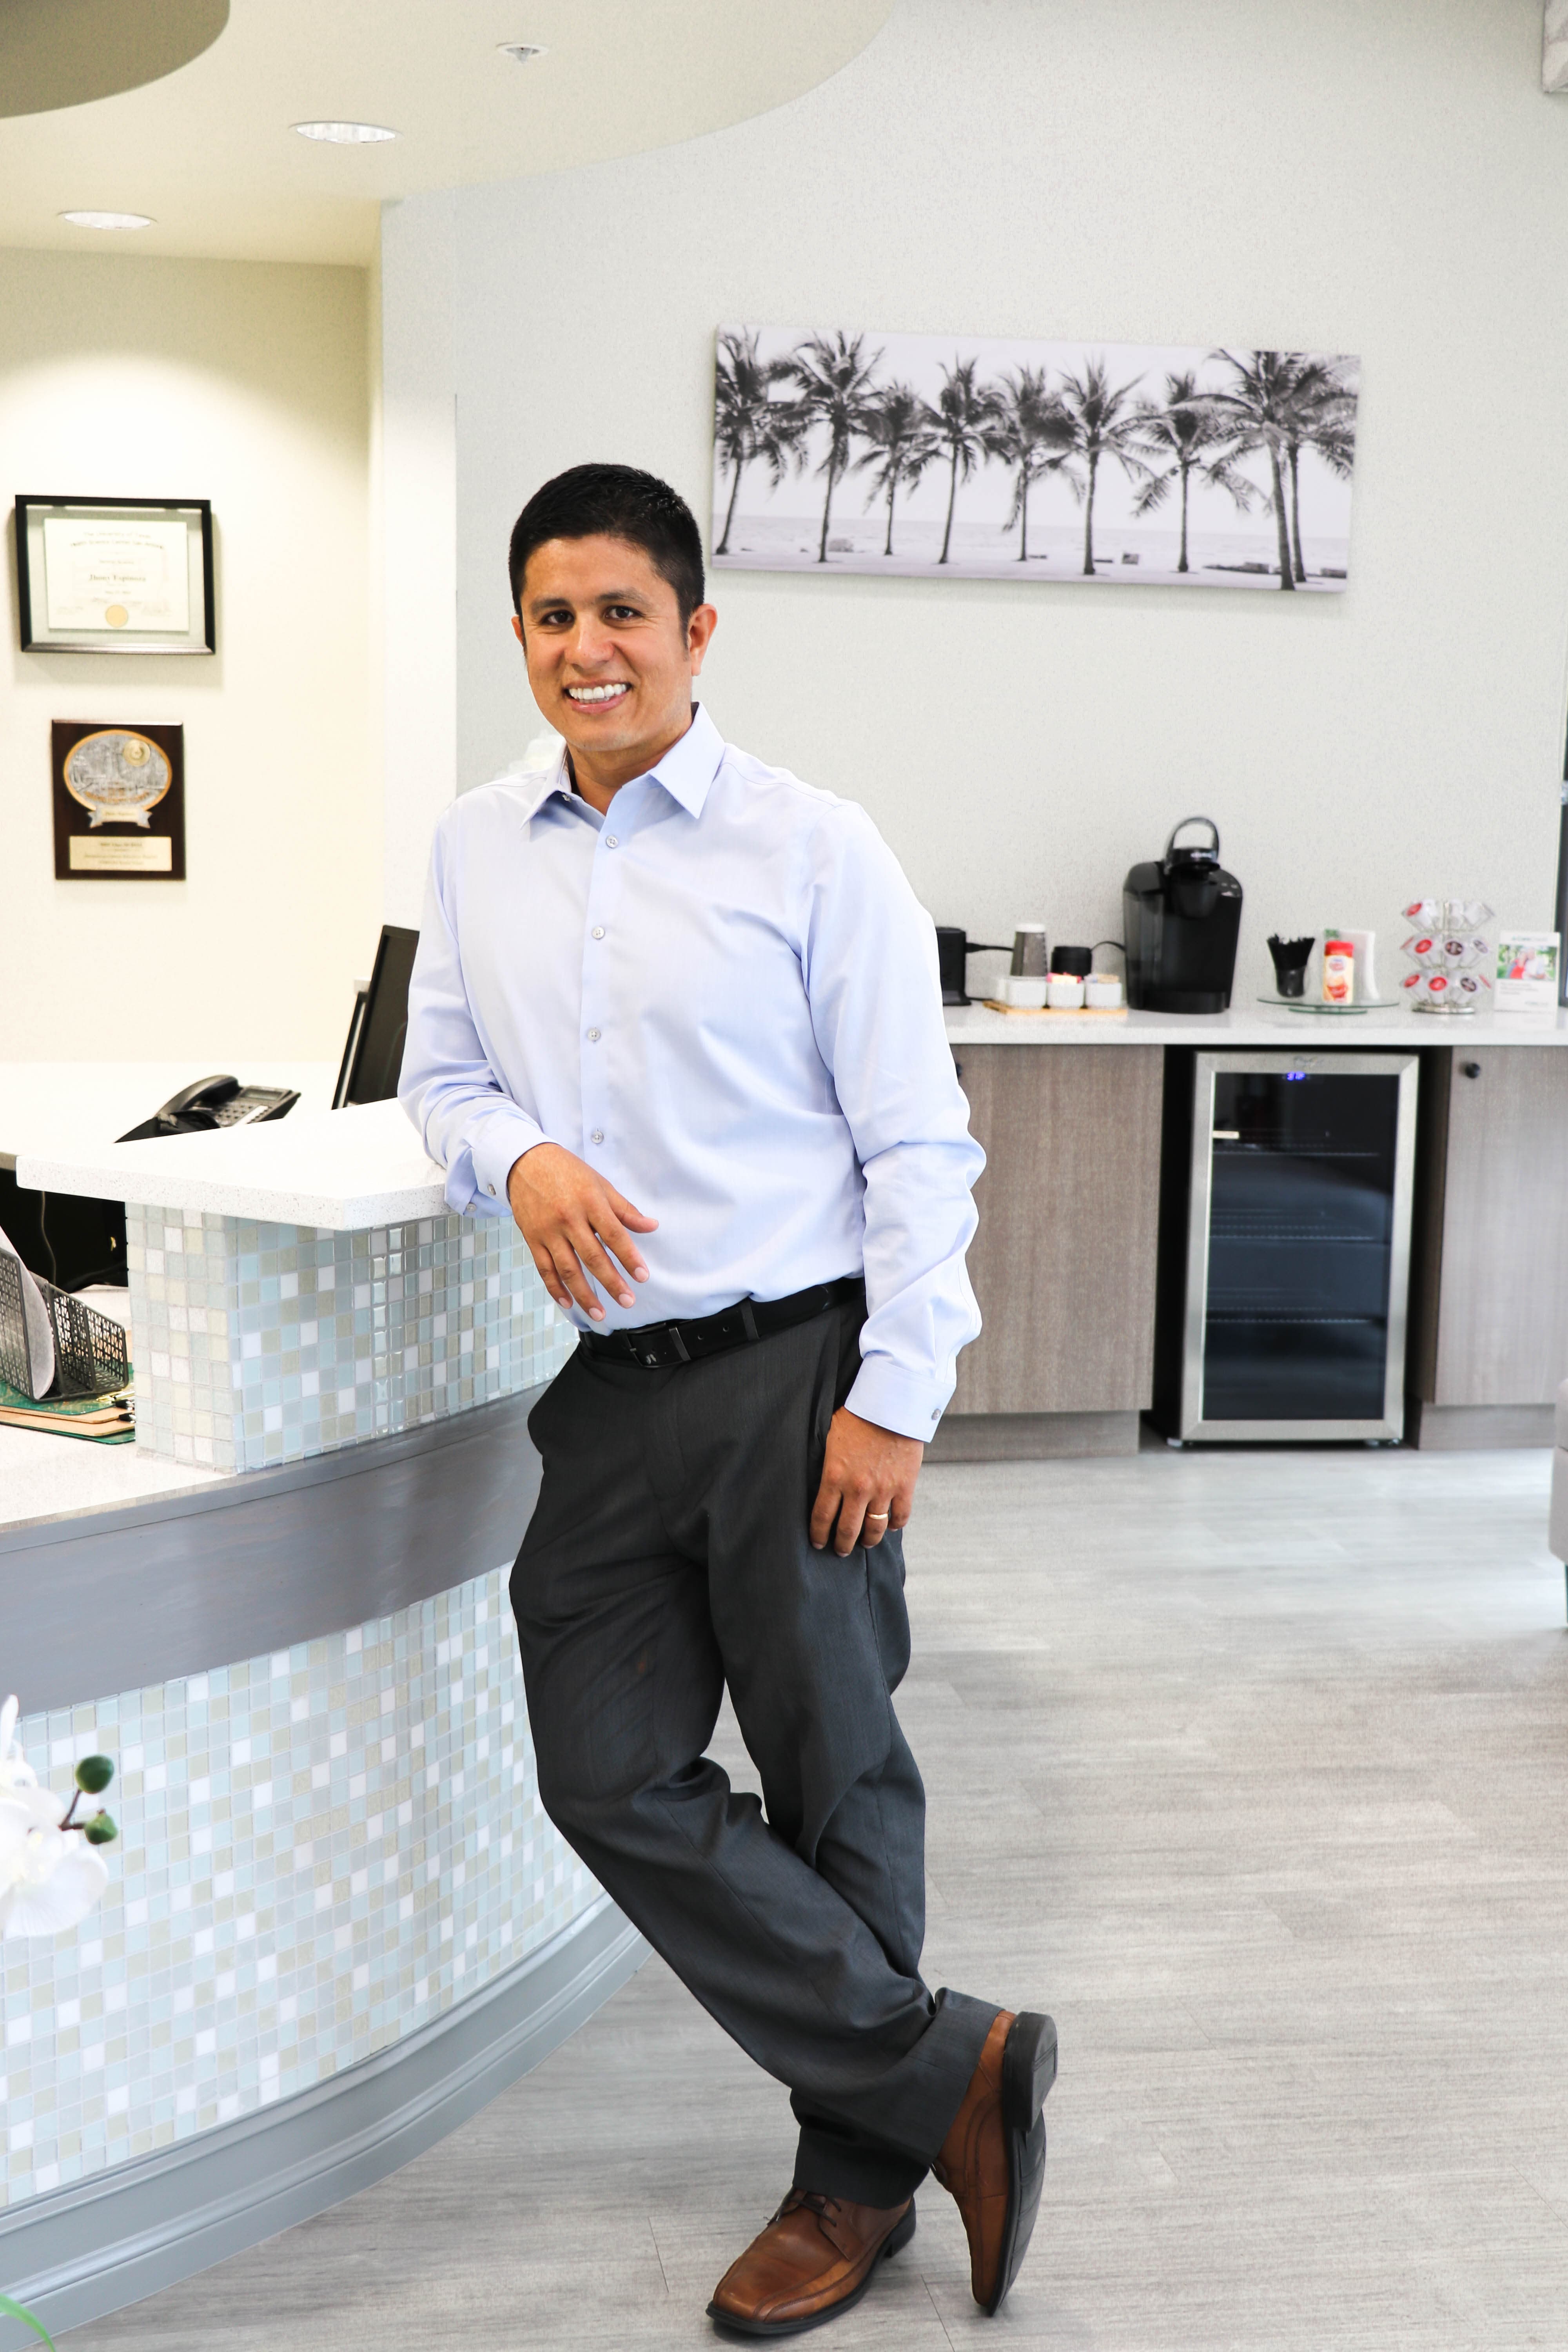 Meet Jhony Espinoza, DDS in Cape Coral